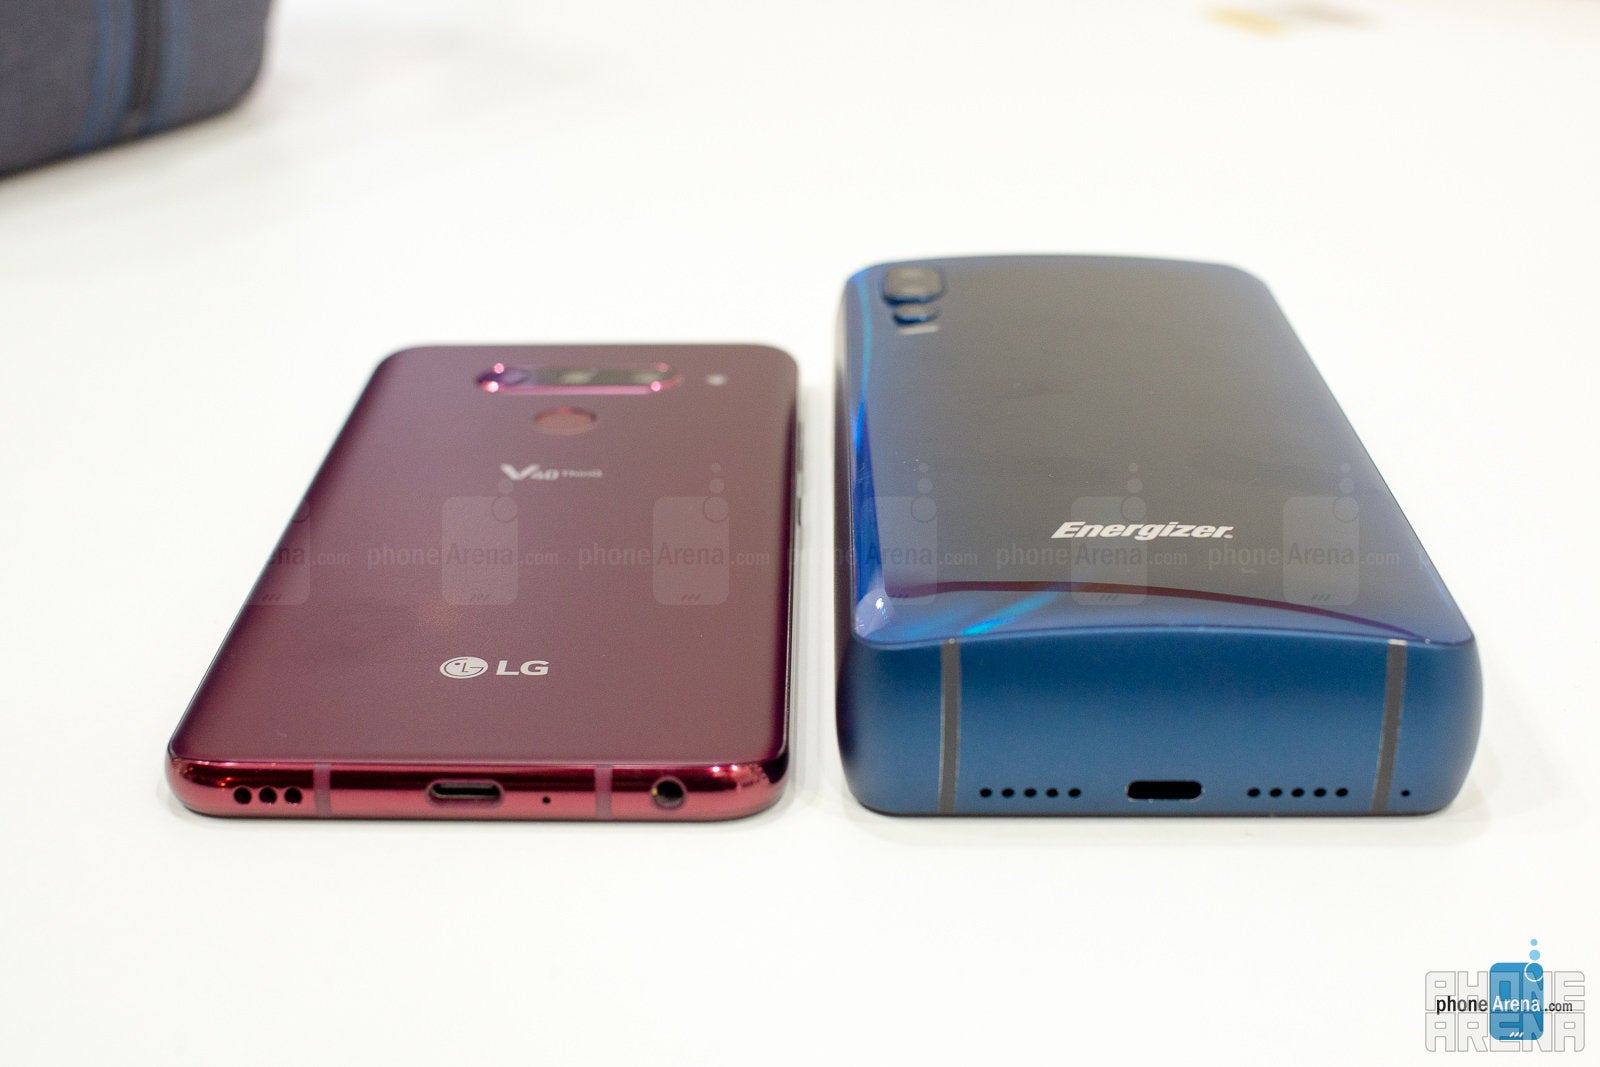 The LG V40 (left) vs the Energizer Power Max P18K Pop (right, obviously) - I got to hold the phone with the biggest battery in the world